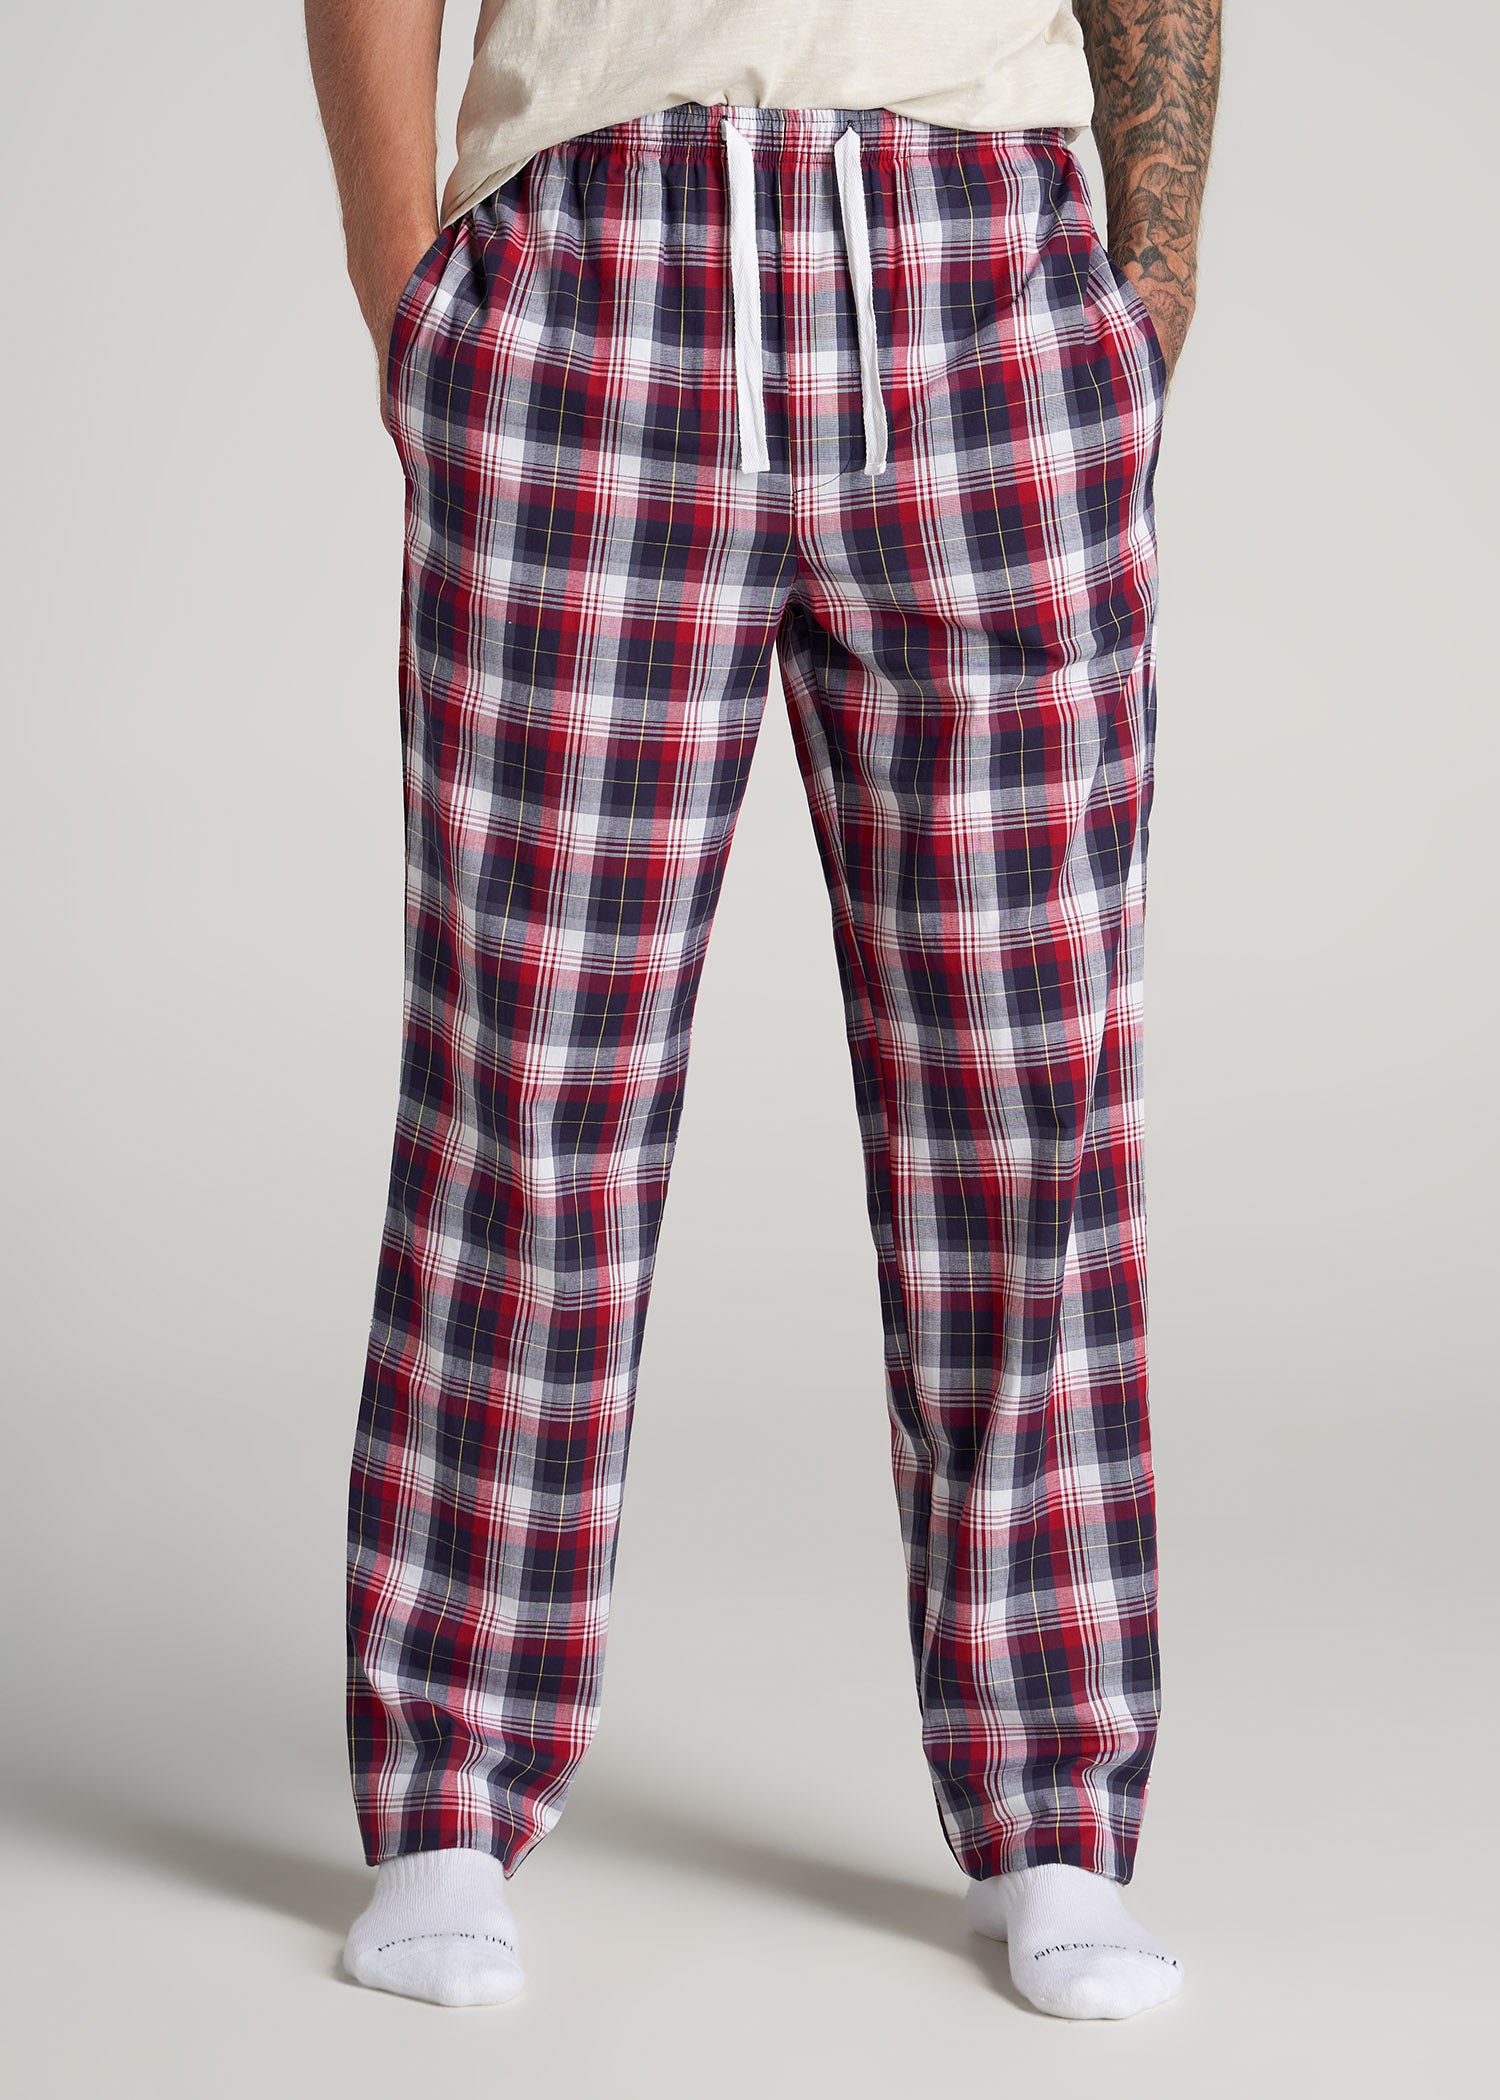        American-Tall-Men-Woven-Pajama-Dark-Blue-Red-Plaid-front